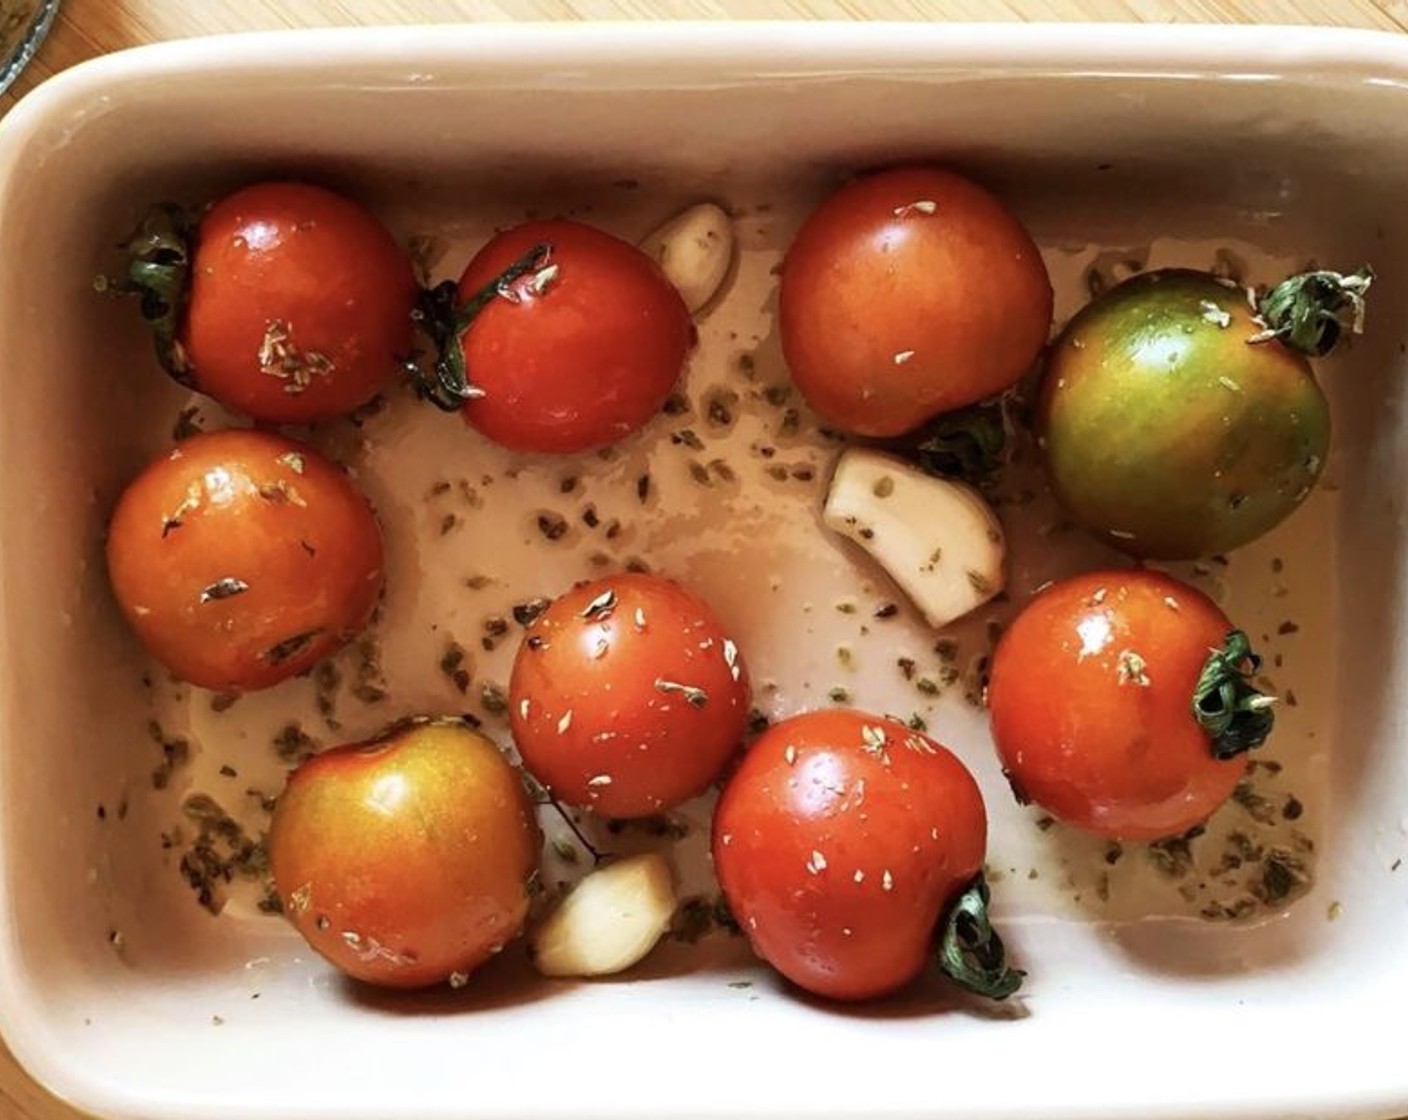 step 2 In a baking tray, place the Cherry Tomatoes (2 cups), Garlic (3 cloves), Dried Oregano (1/2 tsp), and Extra-Virgin Olive Oil (2 Tbsp). Toss everything together.